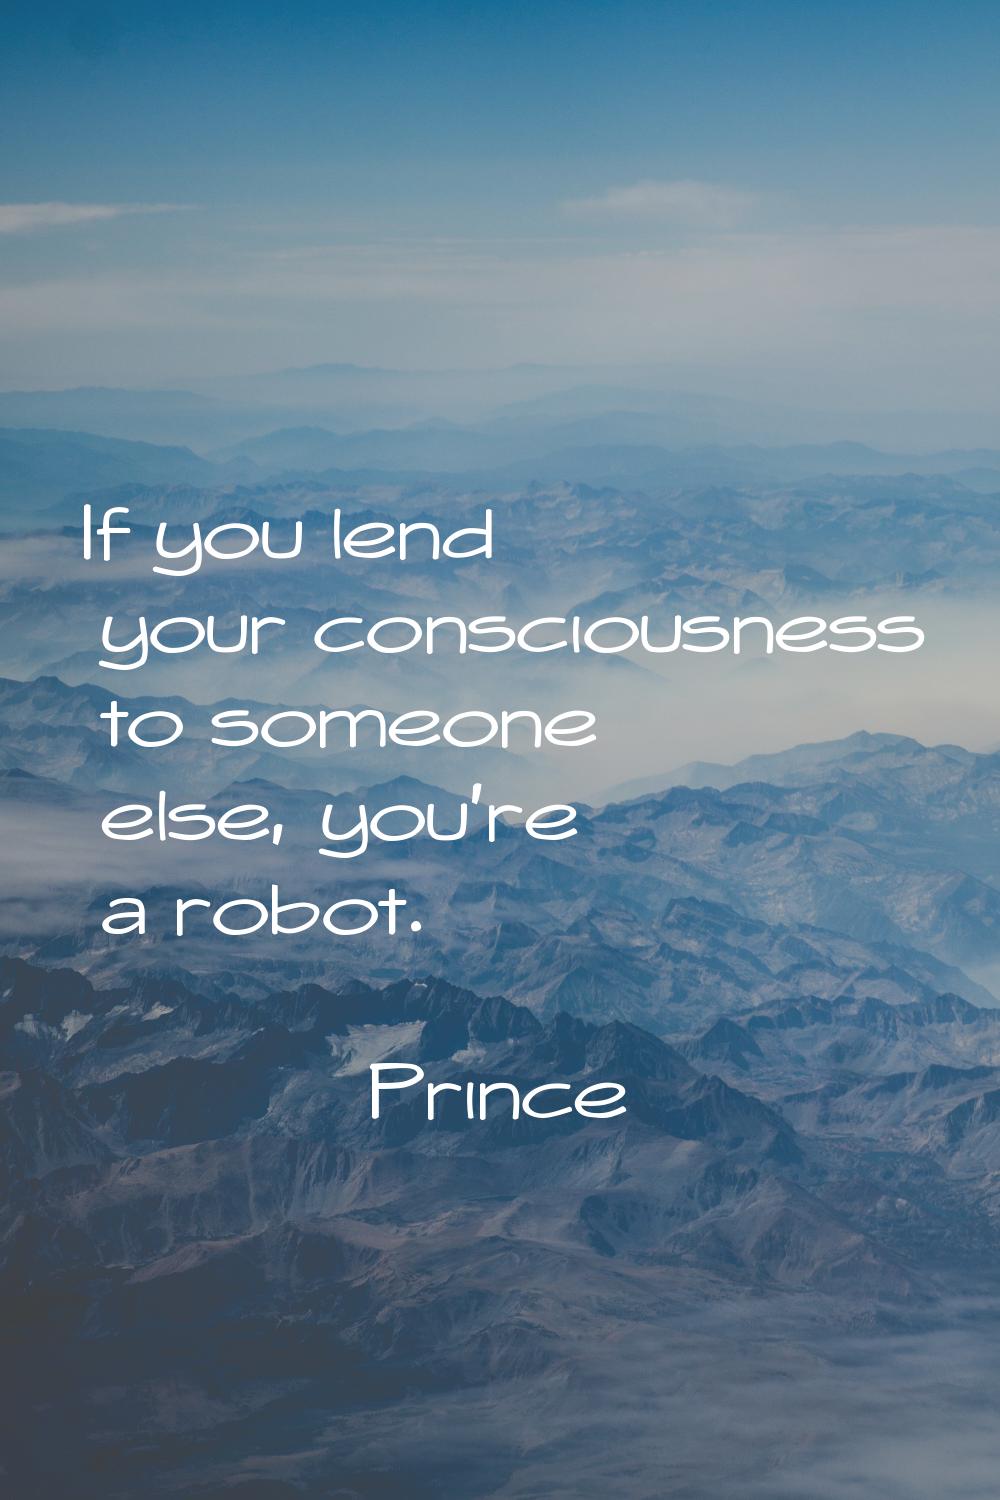 If you lend your consciousness to someone else, you're a robot.